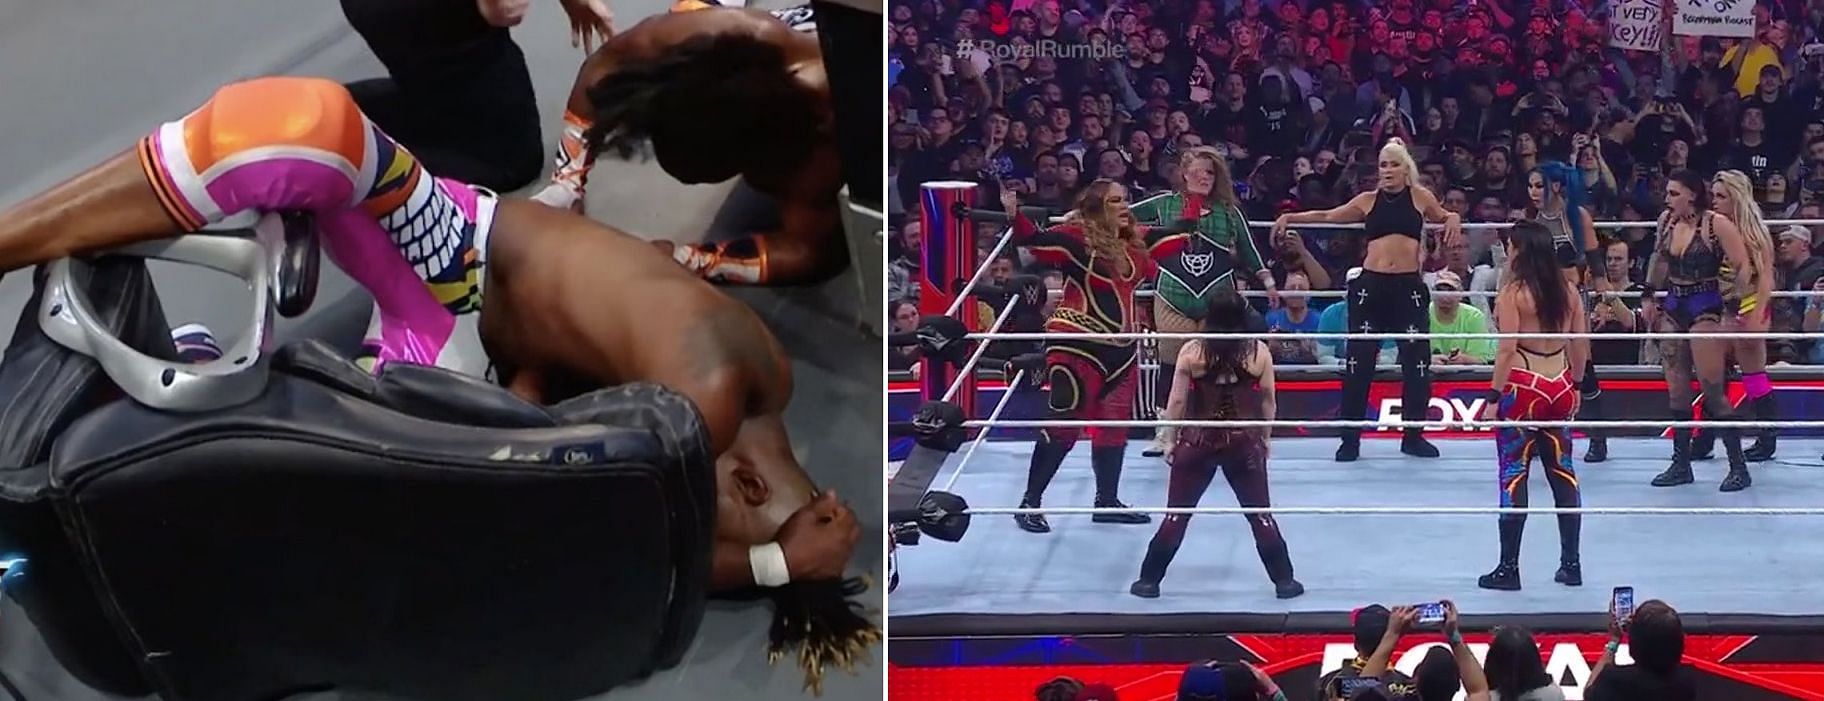 There were a number of botches at The Royal Rumble